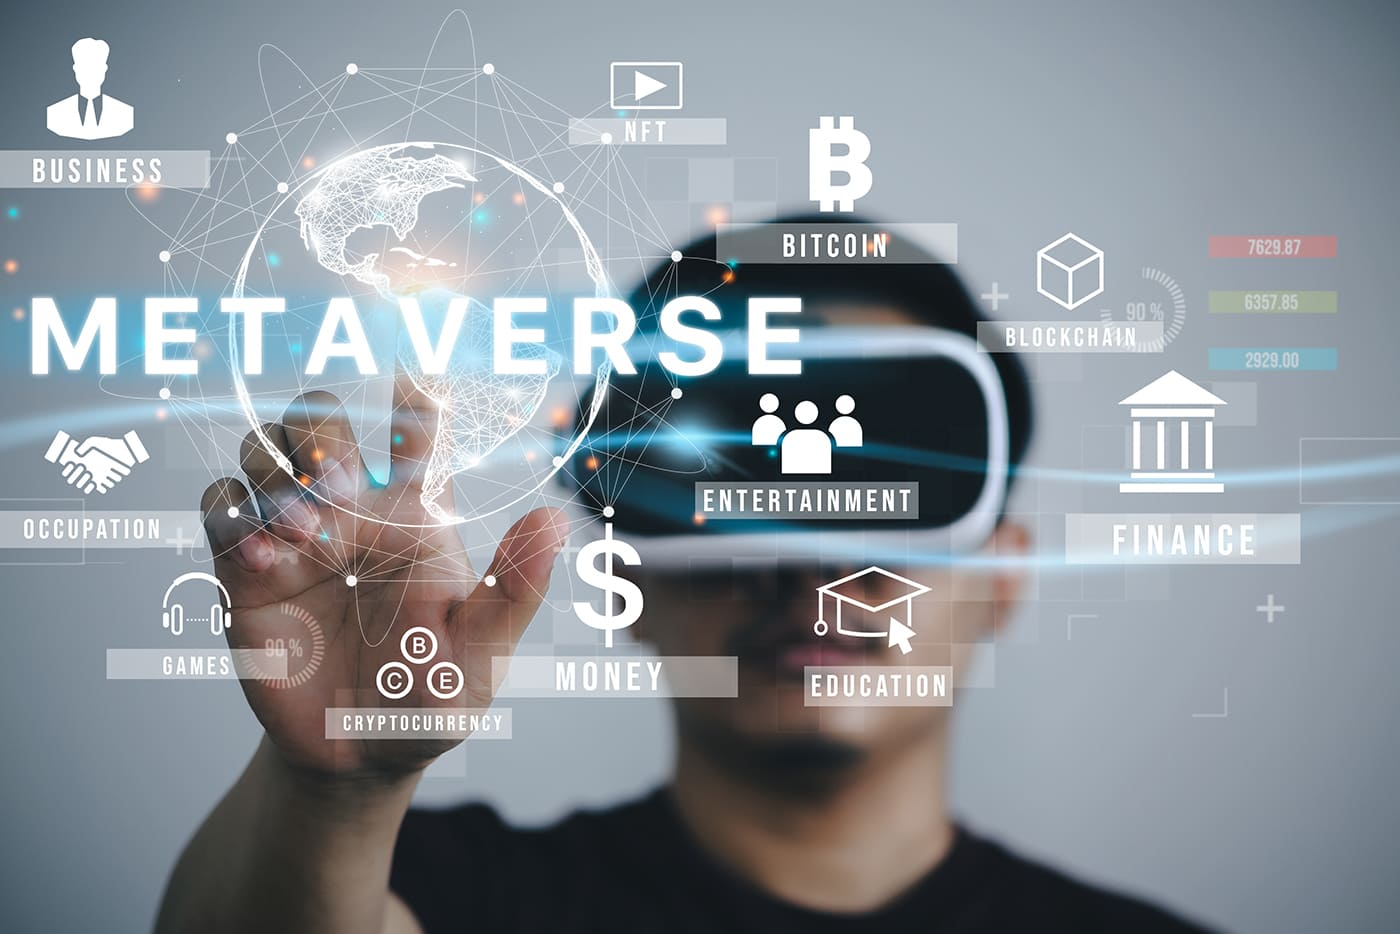 Is it possible to become a leader in metaverse app development?